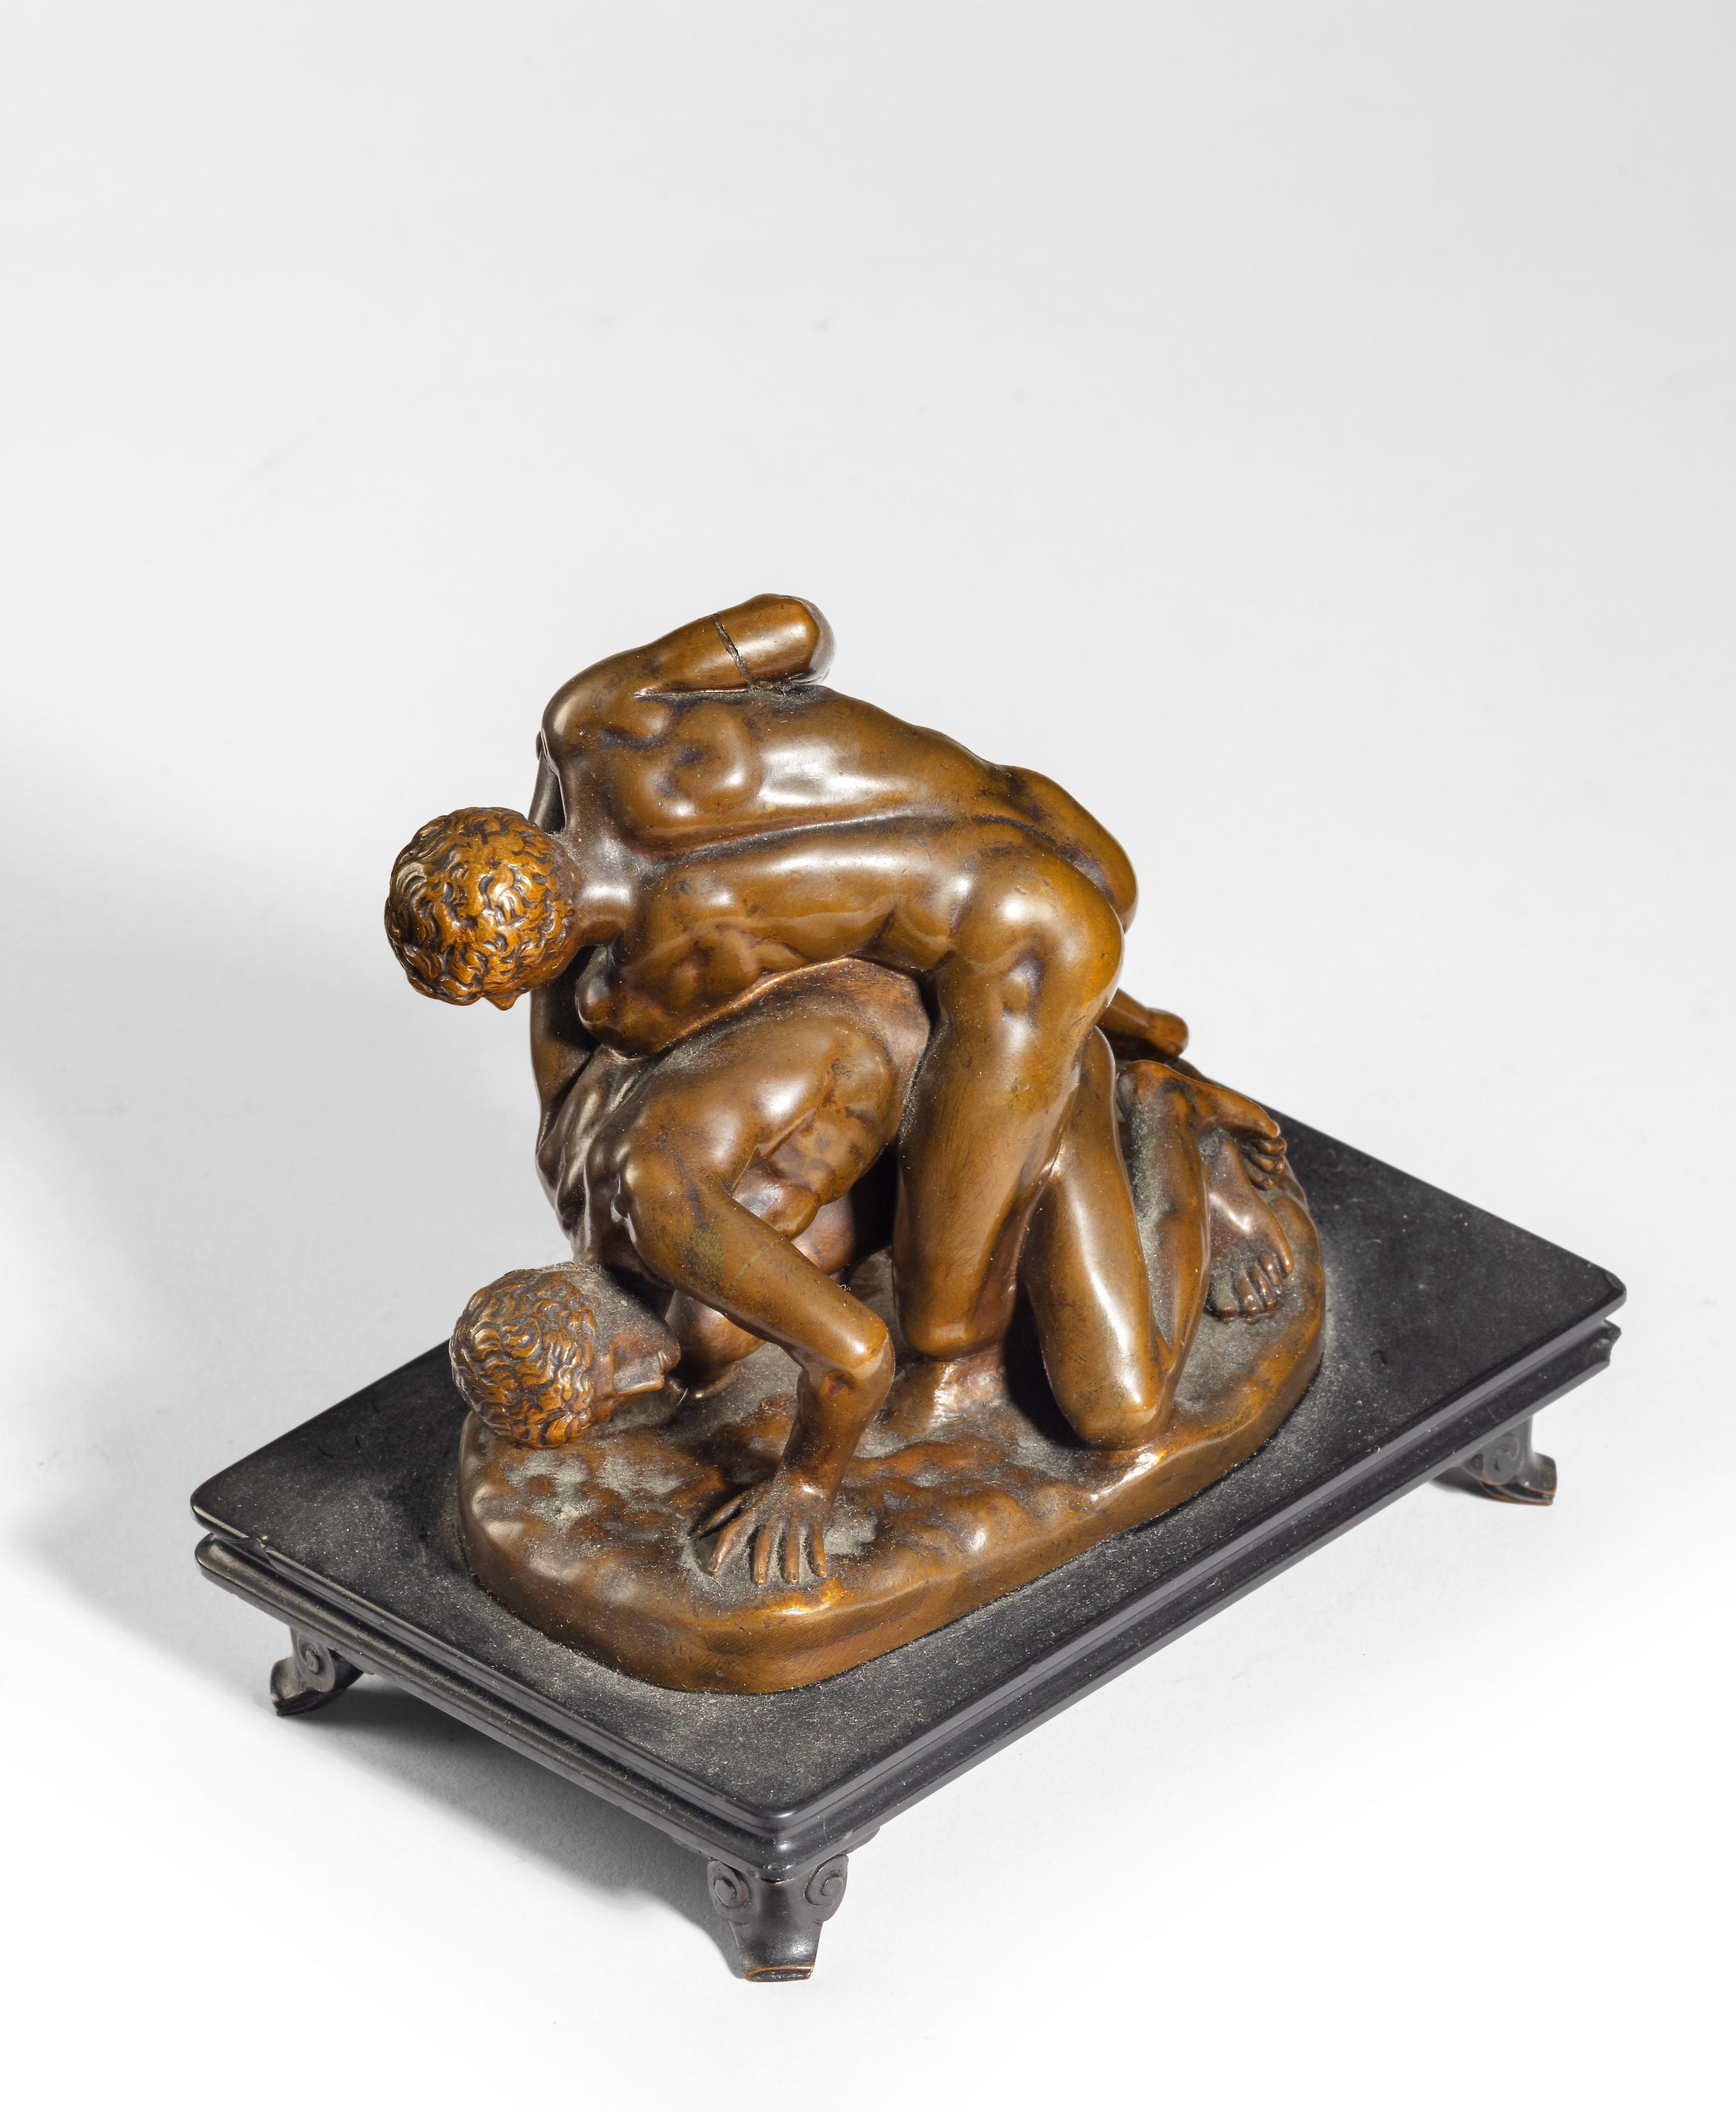 A 19th century bronze of 'The Wrestlers', after the antique, 
Bronze cast by Ferdinand Barbedienne
9cm high, 11cm wide

The two young men are engaged in the pankration, a kind of wrestling similar to the present-day sport of mixed martial arts. The